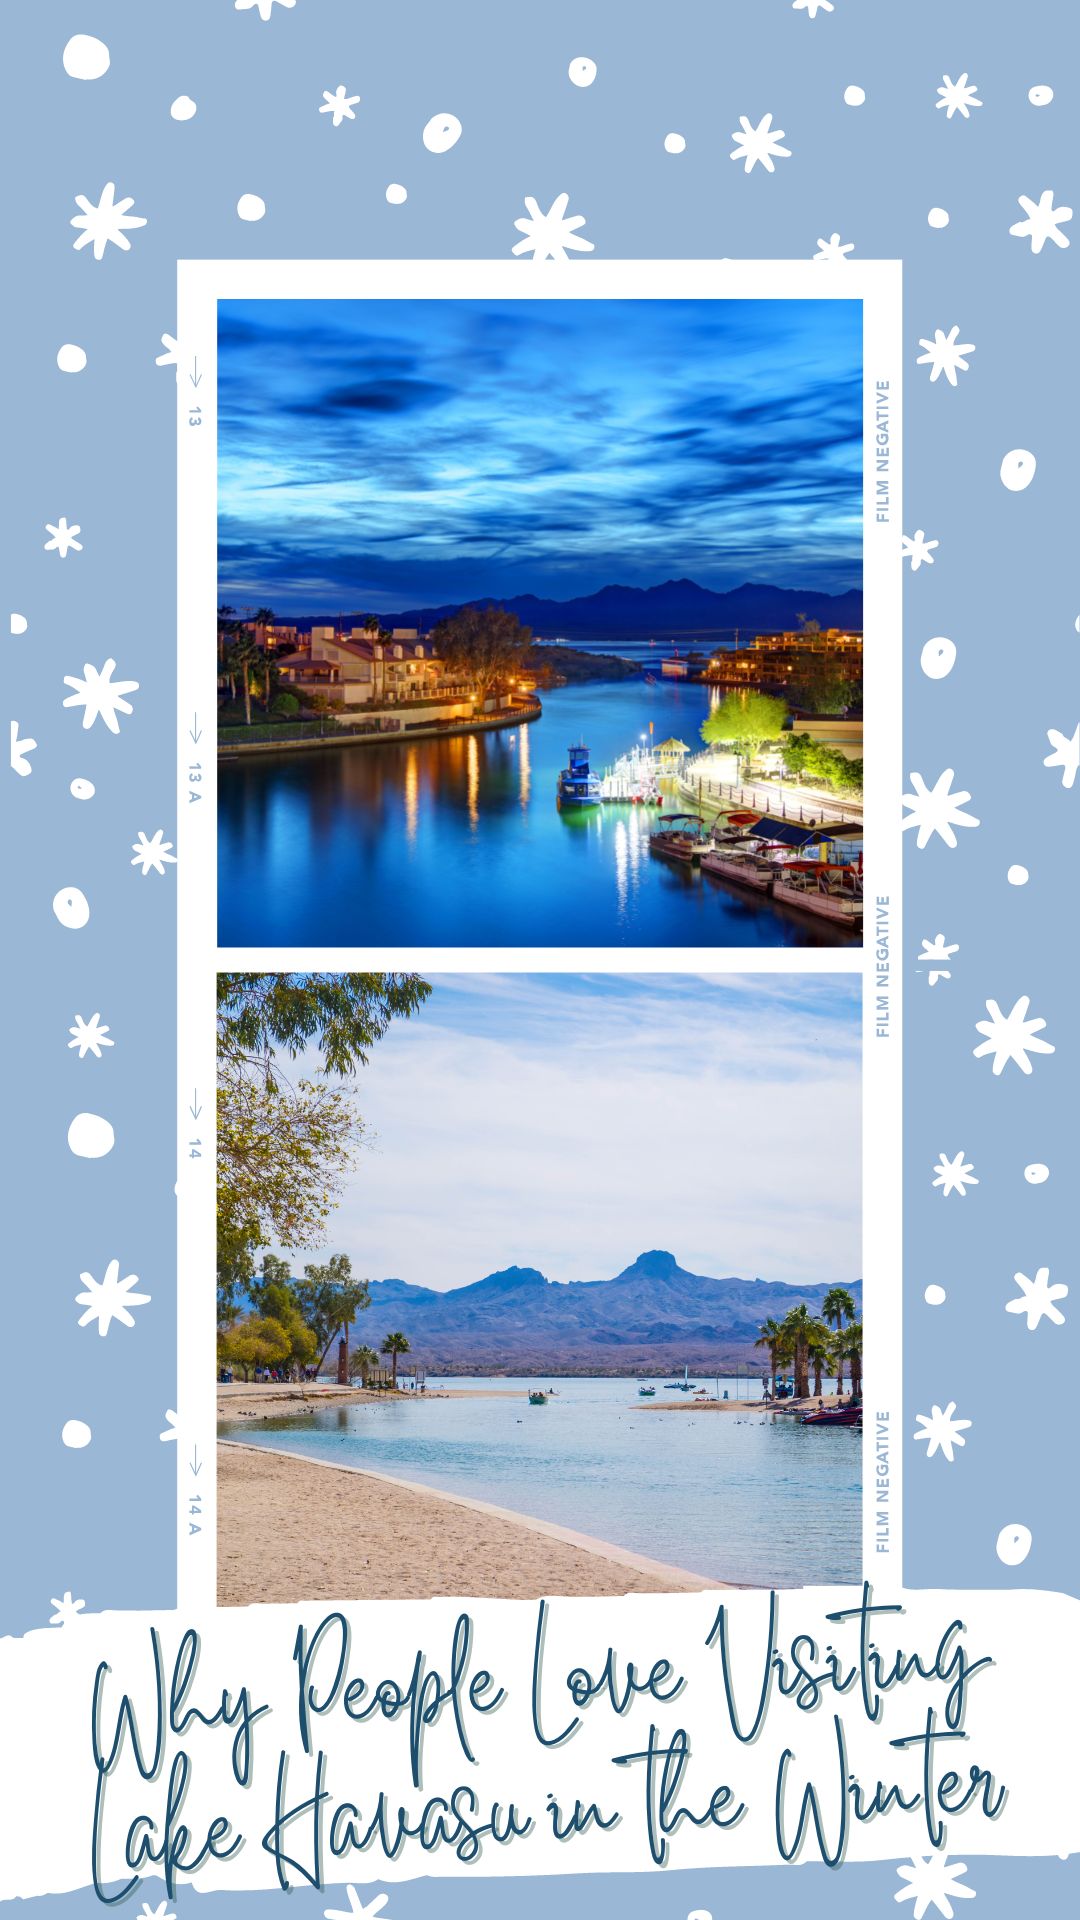 Why People Love Visiting Lake Havasu in the Winter